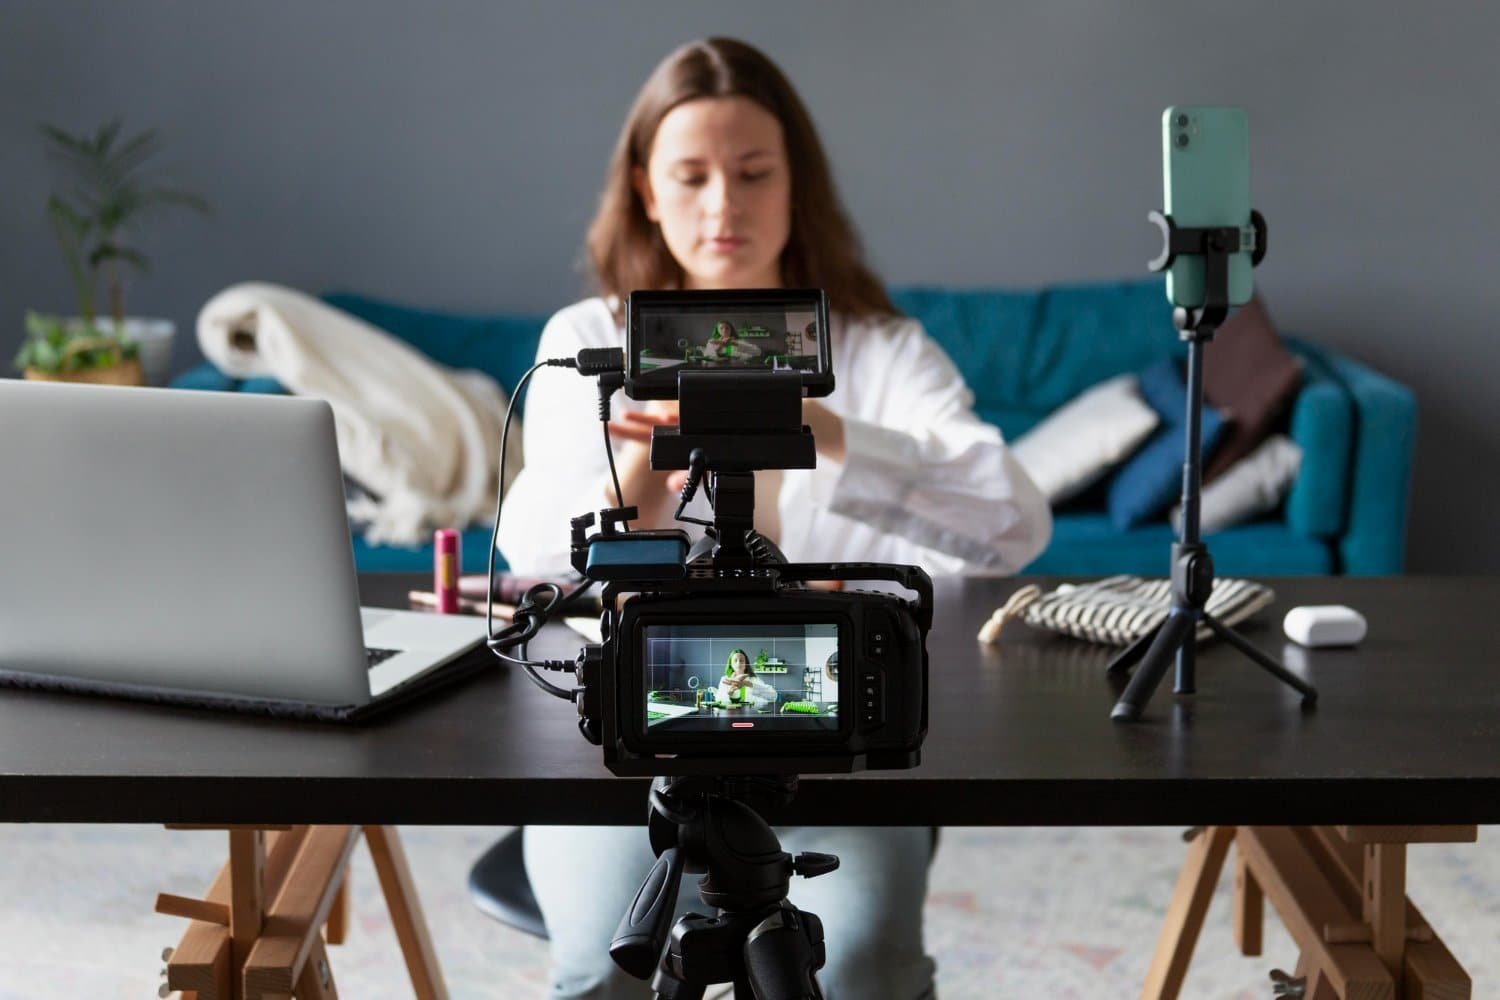 Video Marketing: Creating Engaging Content